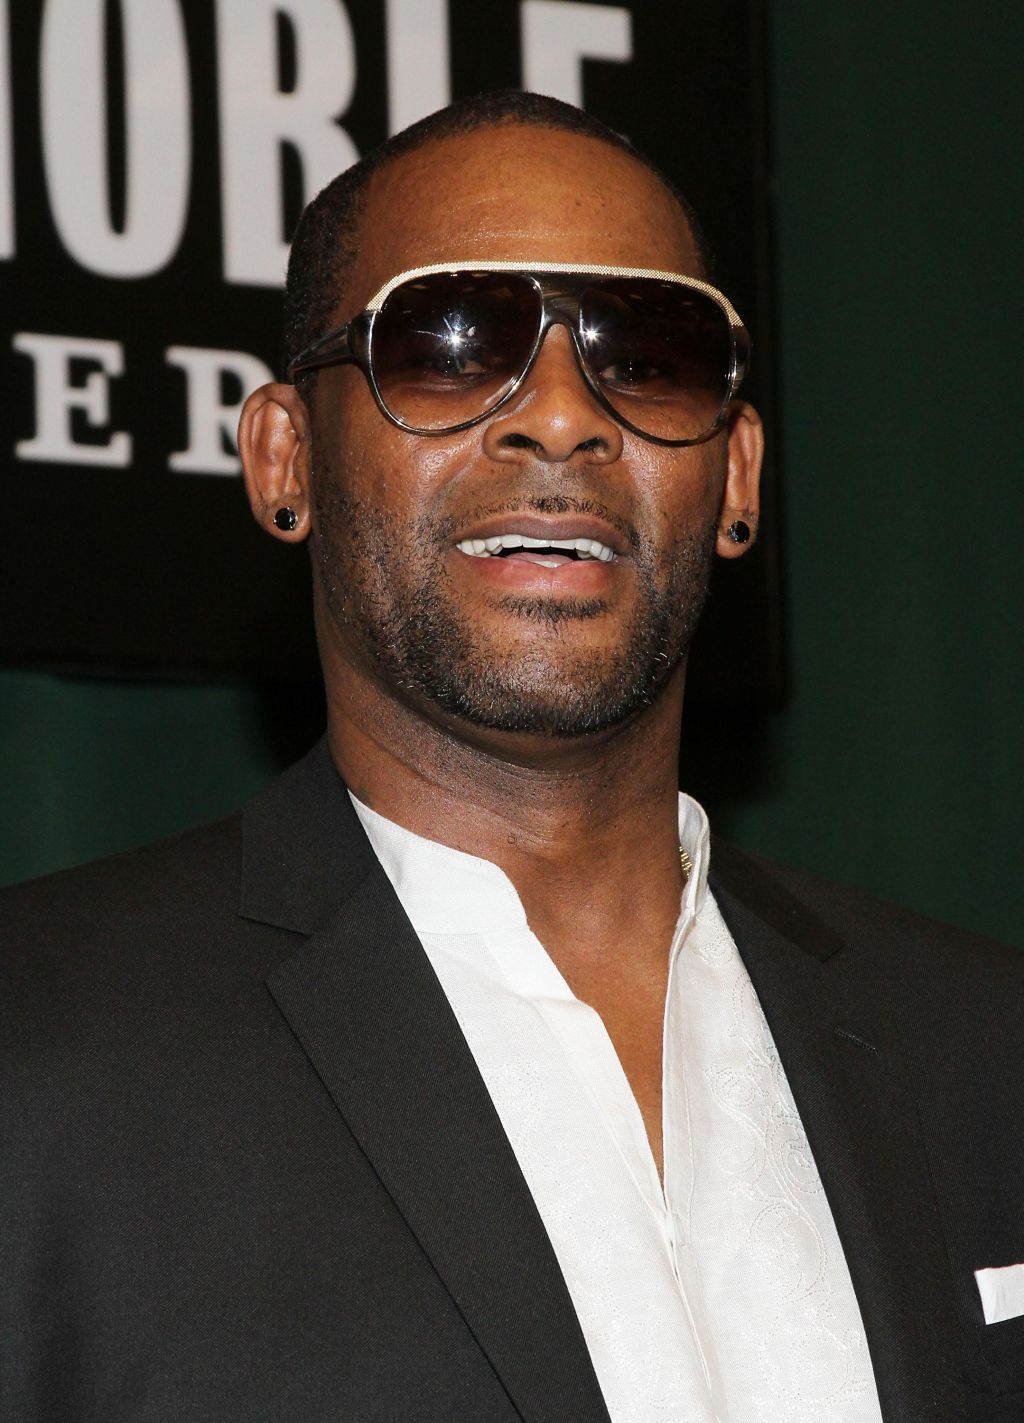 R. Kelly Signs Copies Of The New Book 'Soulacoaster: The Diary Of Me'